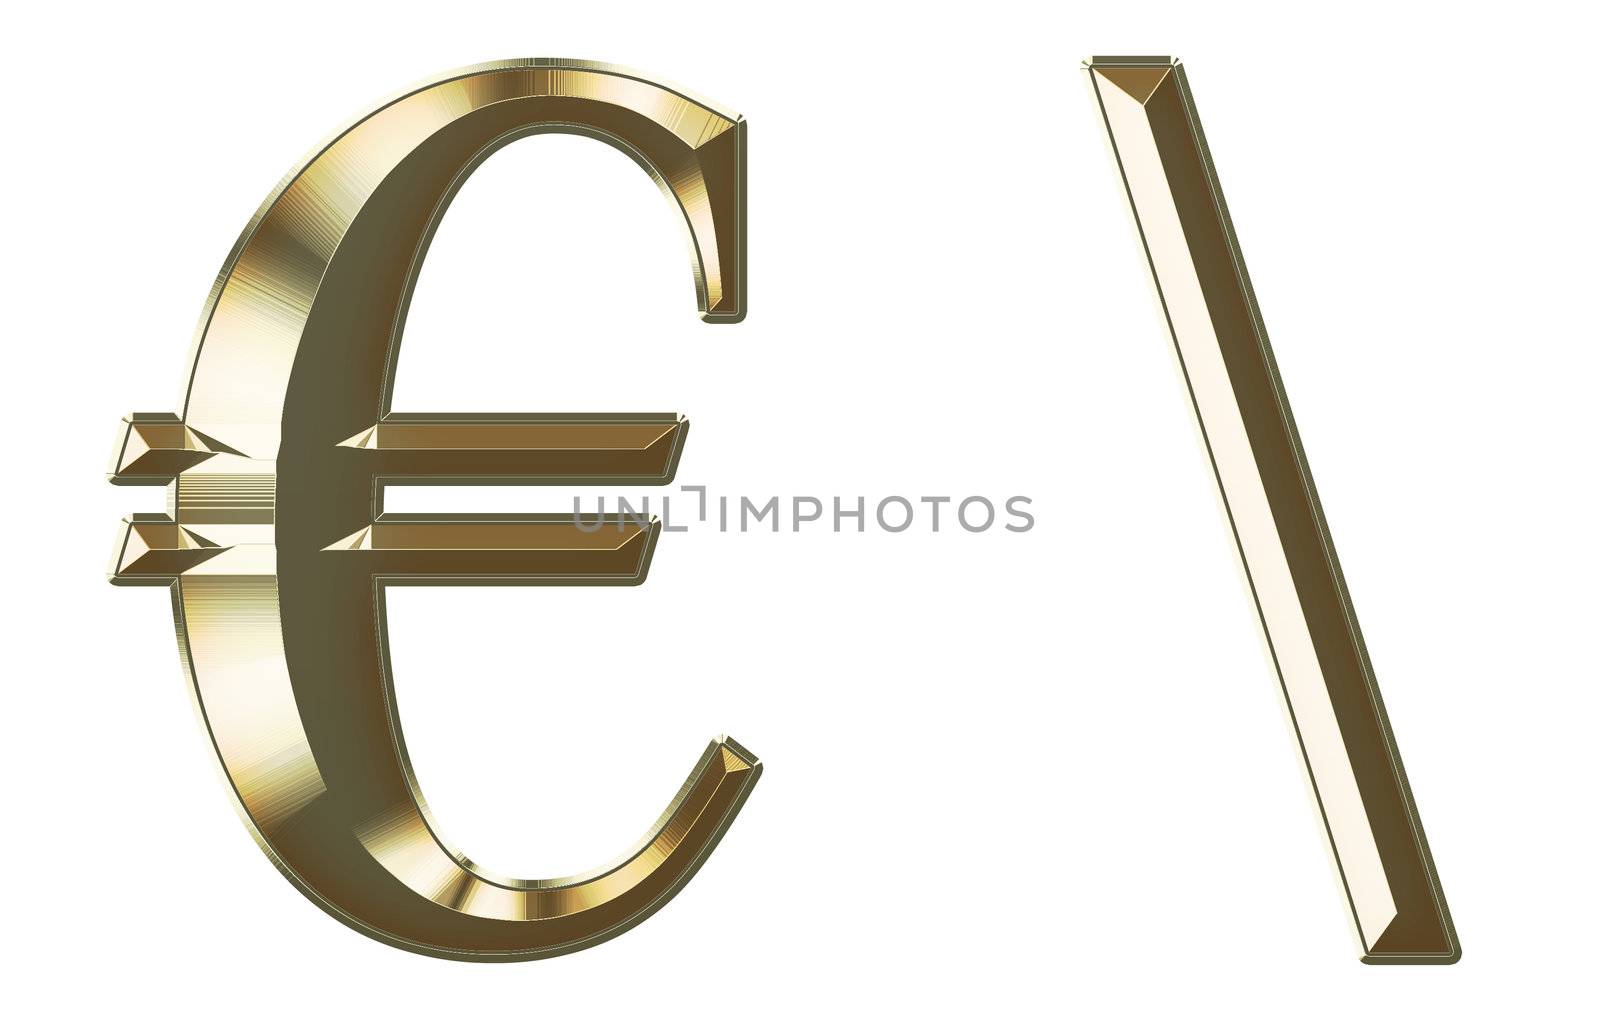 Exclusive collection font from brushed gold on white background